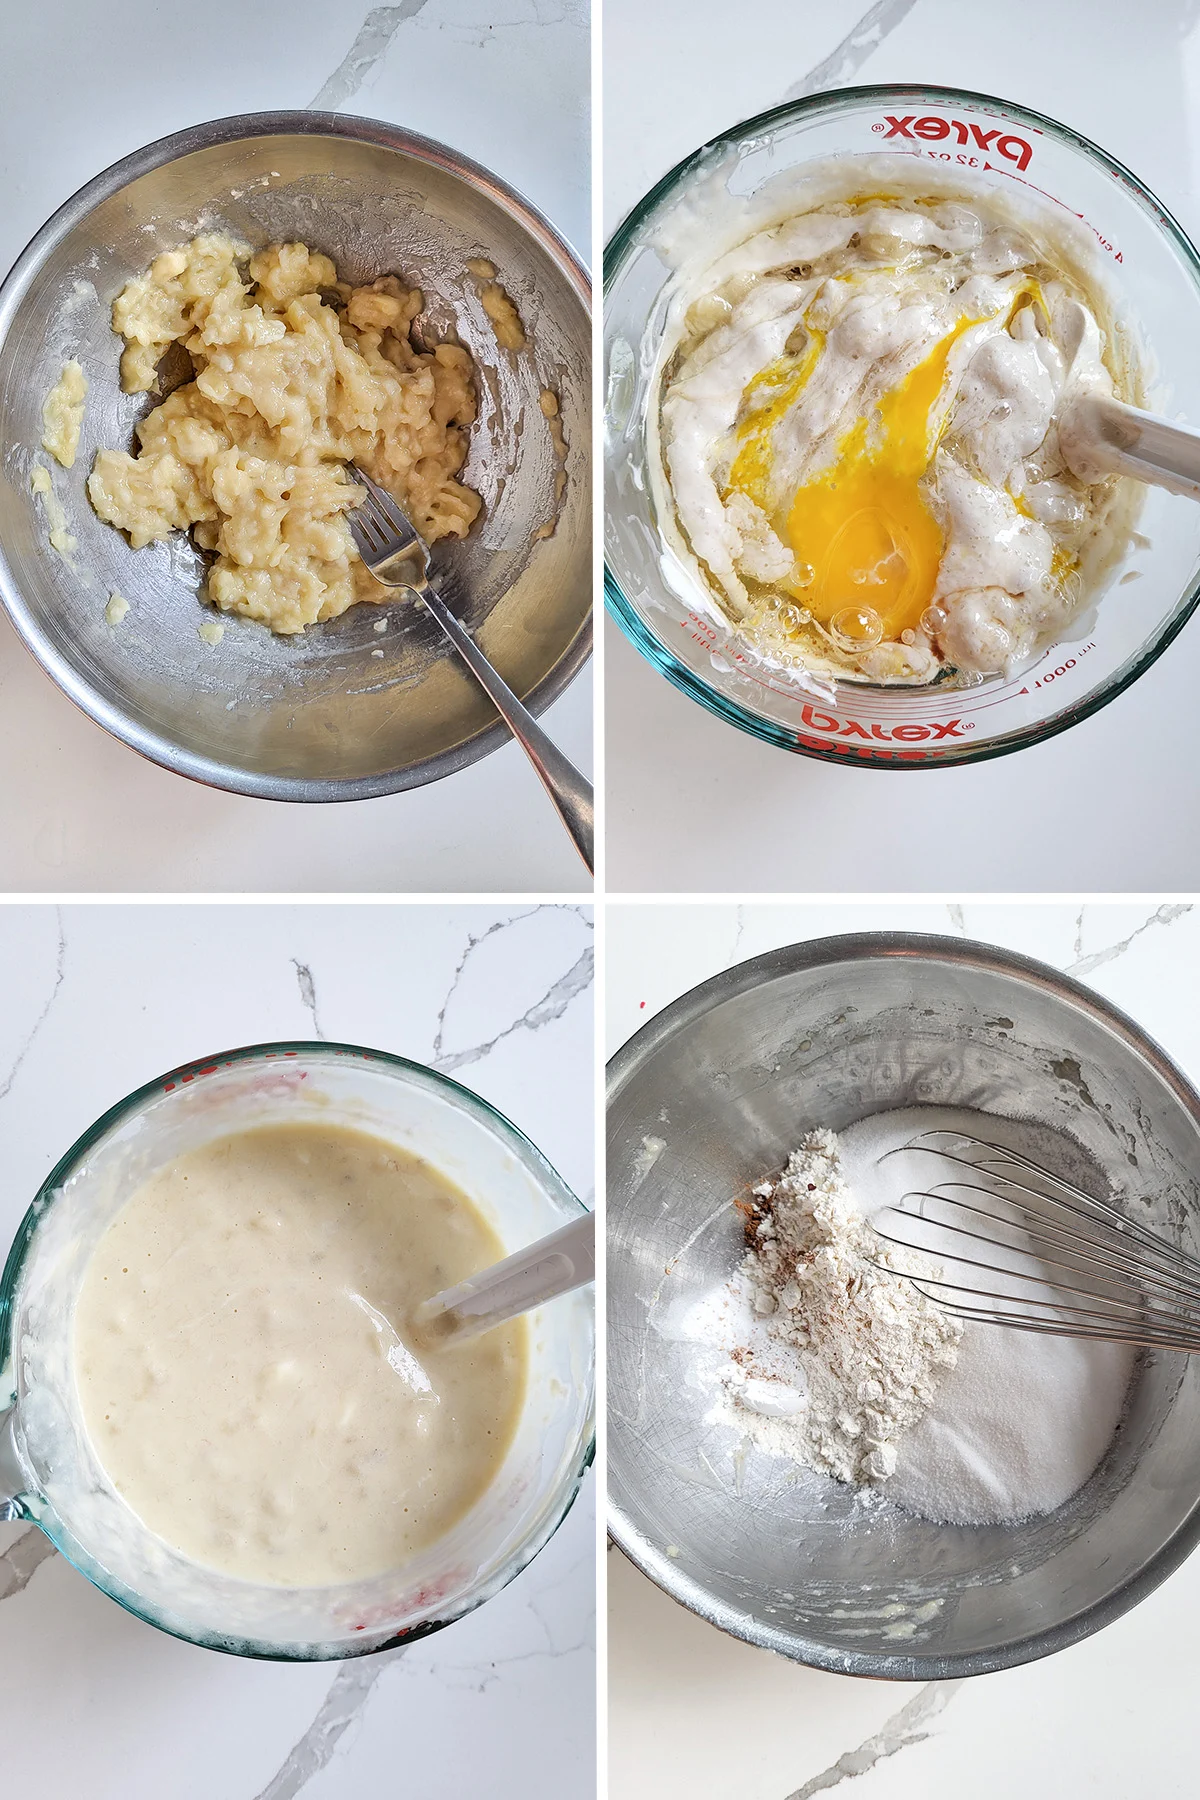 A bowl of mashed bananas. A cup with sourdough discard and eggs. A bowl of dry ingredients with a whisk.